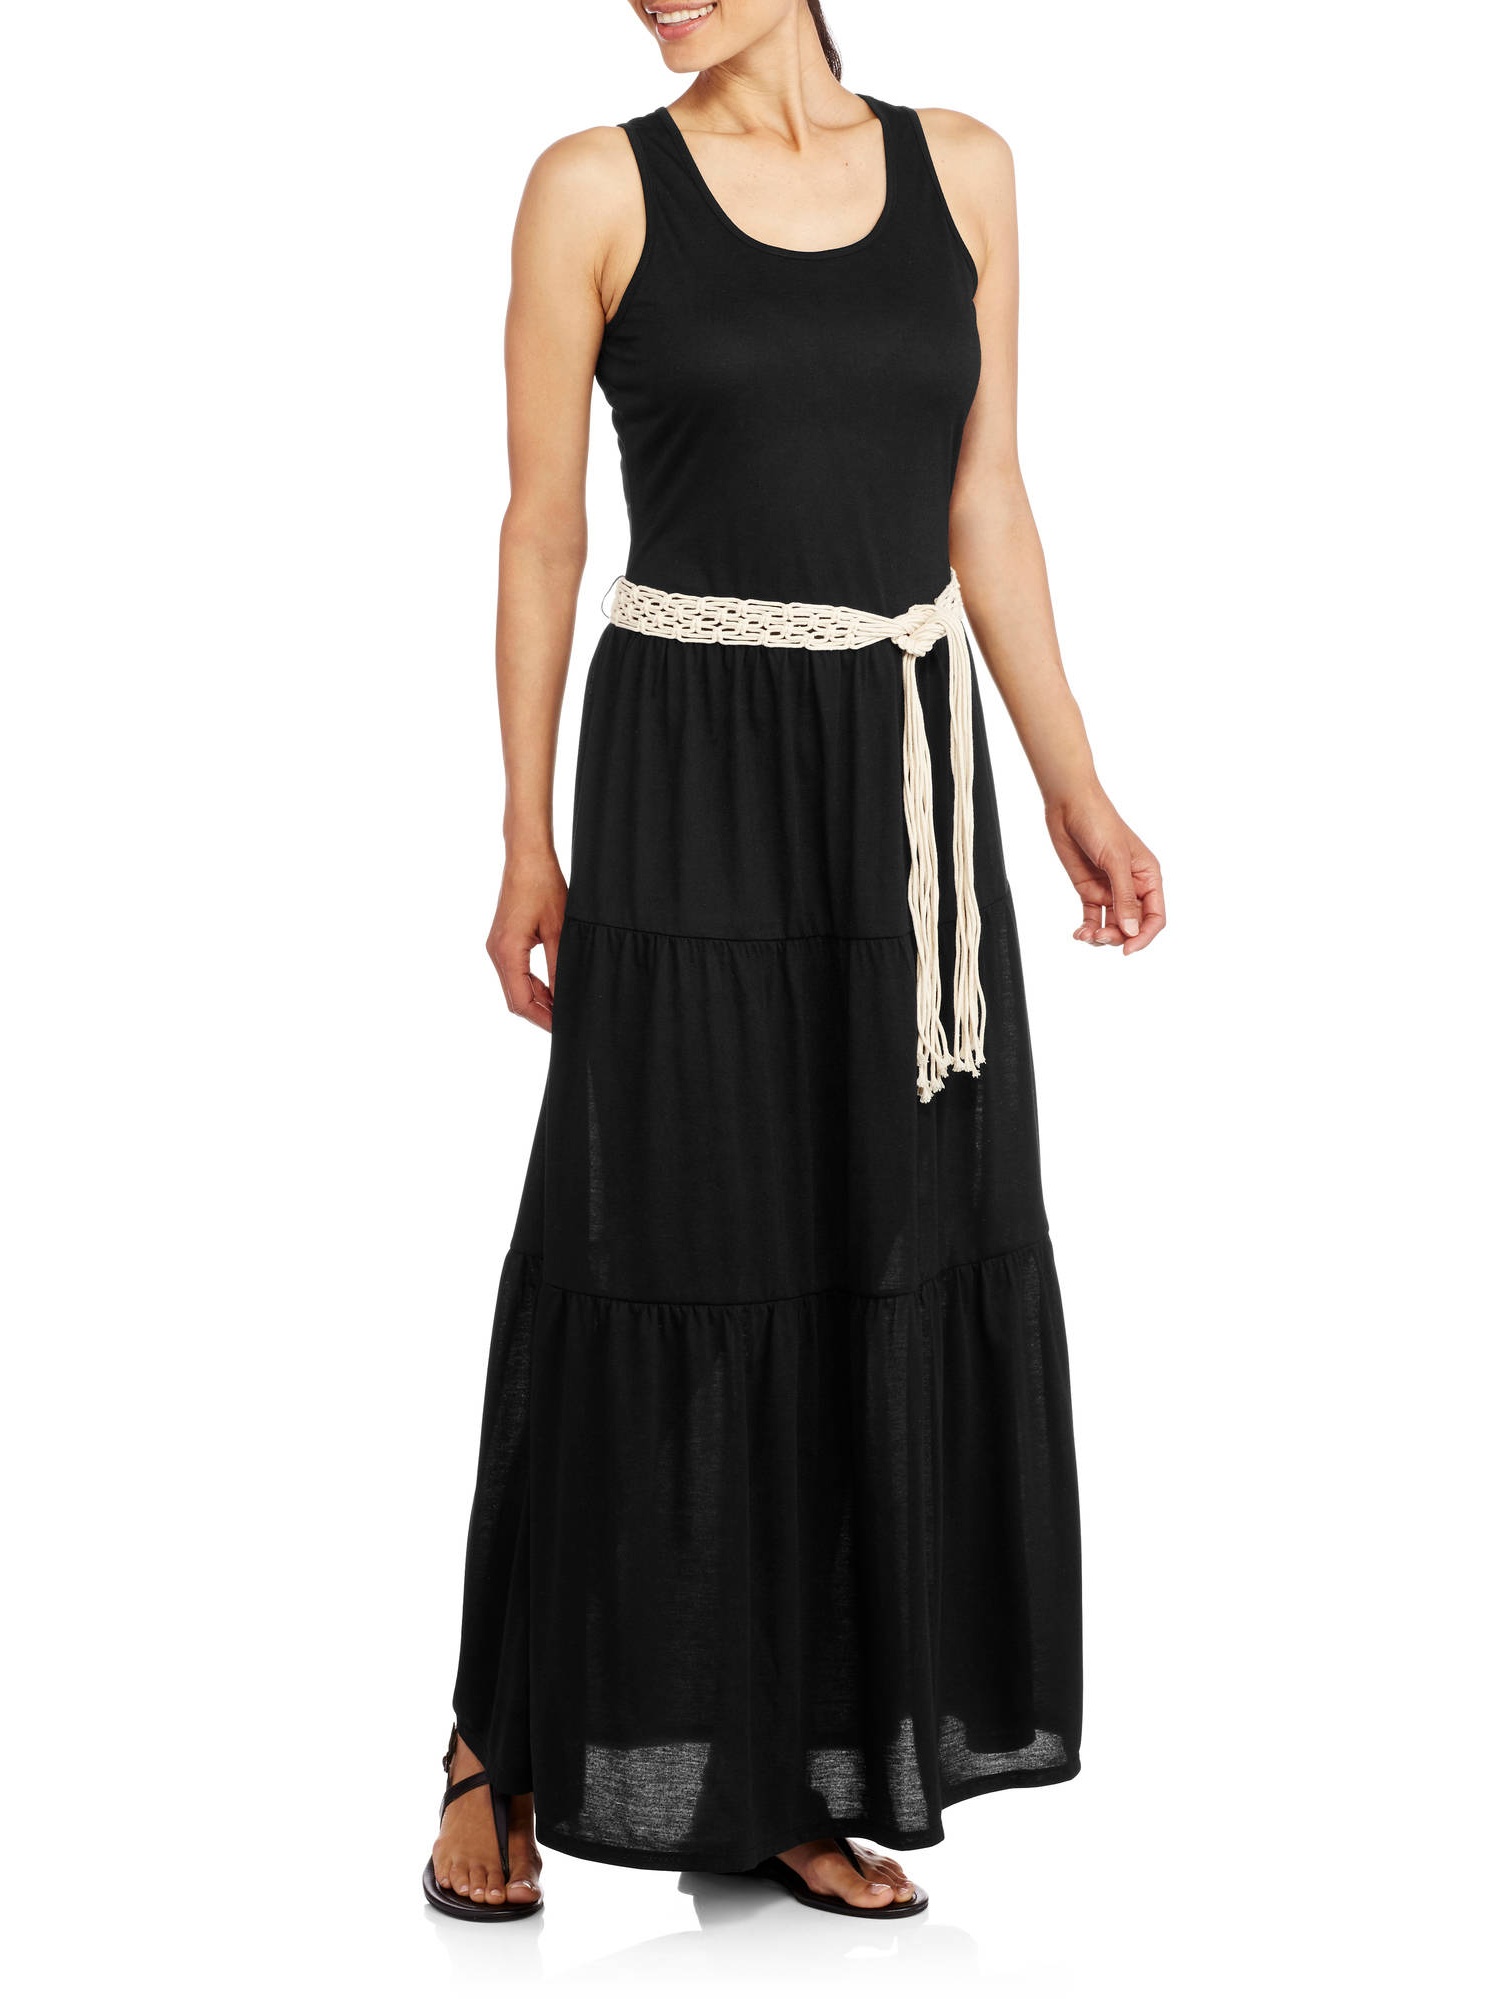 Women's Belted Maxi Dress - image 1 of 2